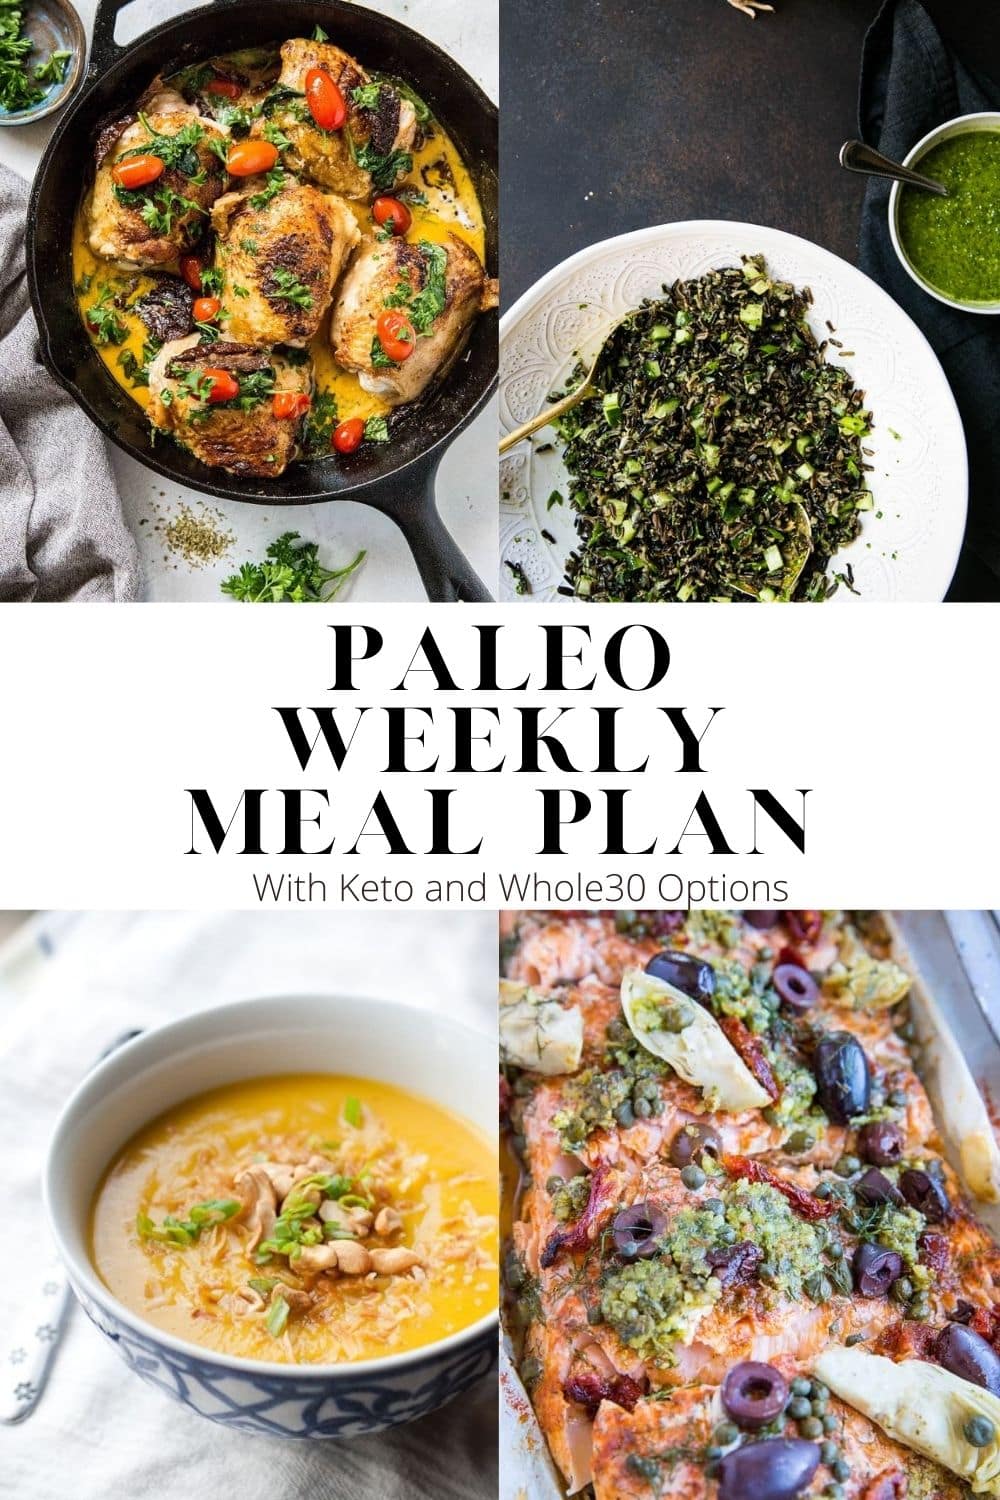 Paleo Weekly Meal Plan with whole30 and keto options. A low-inflammatory meal plan perfect for those who love to eat clean!